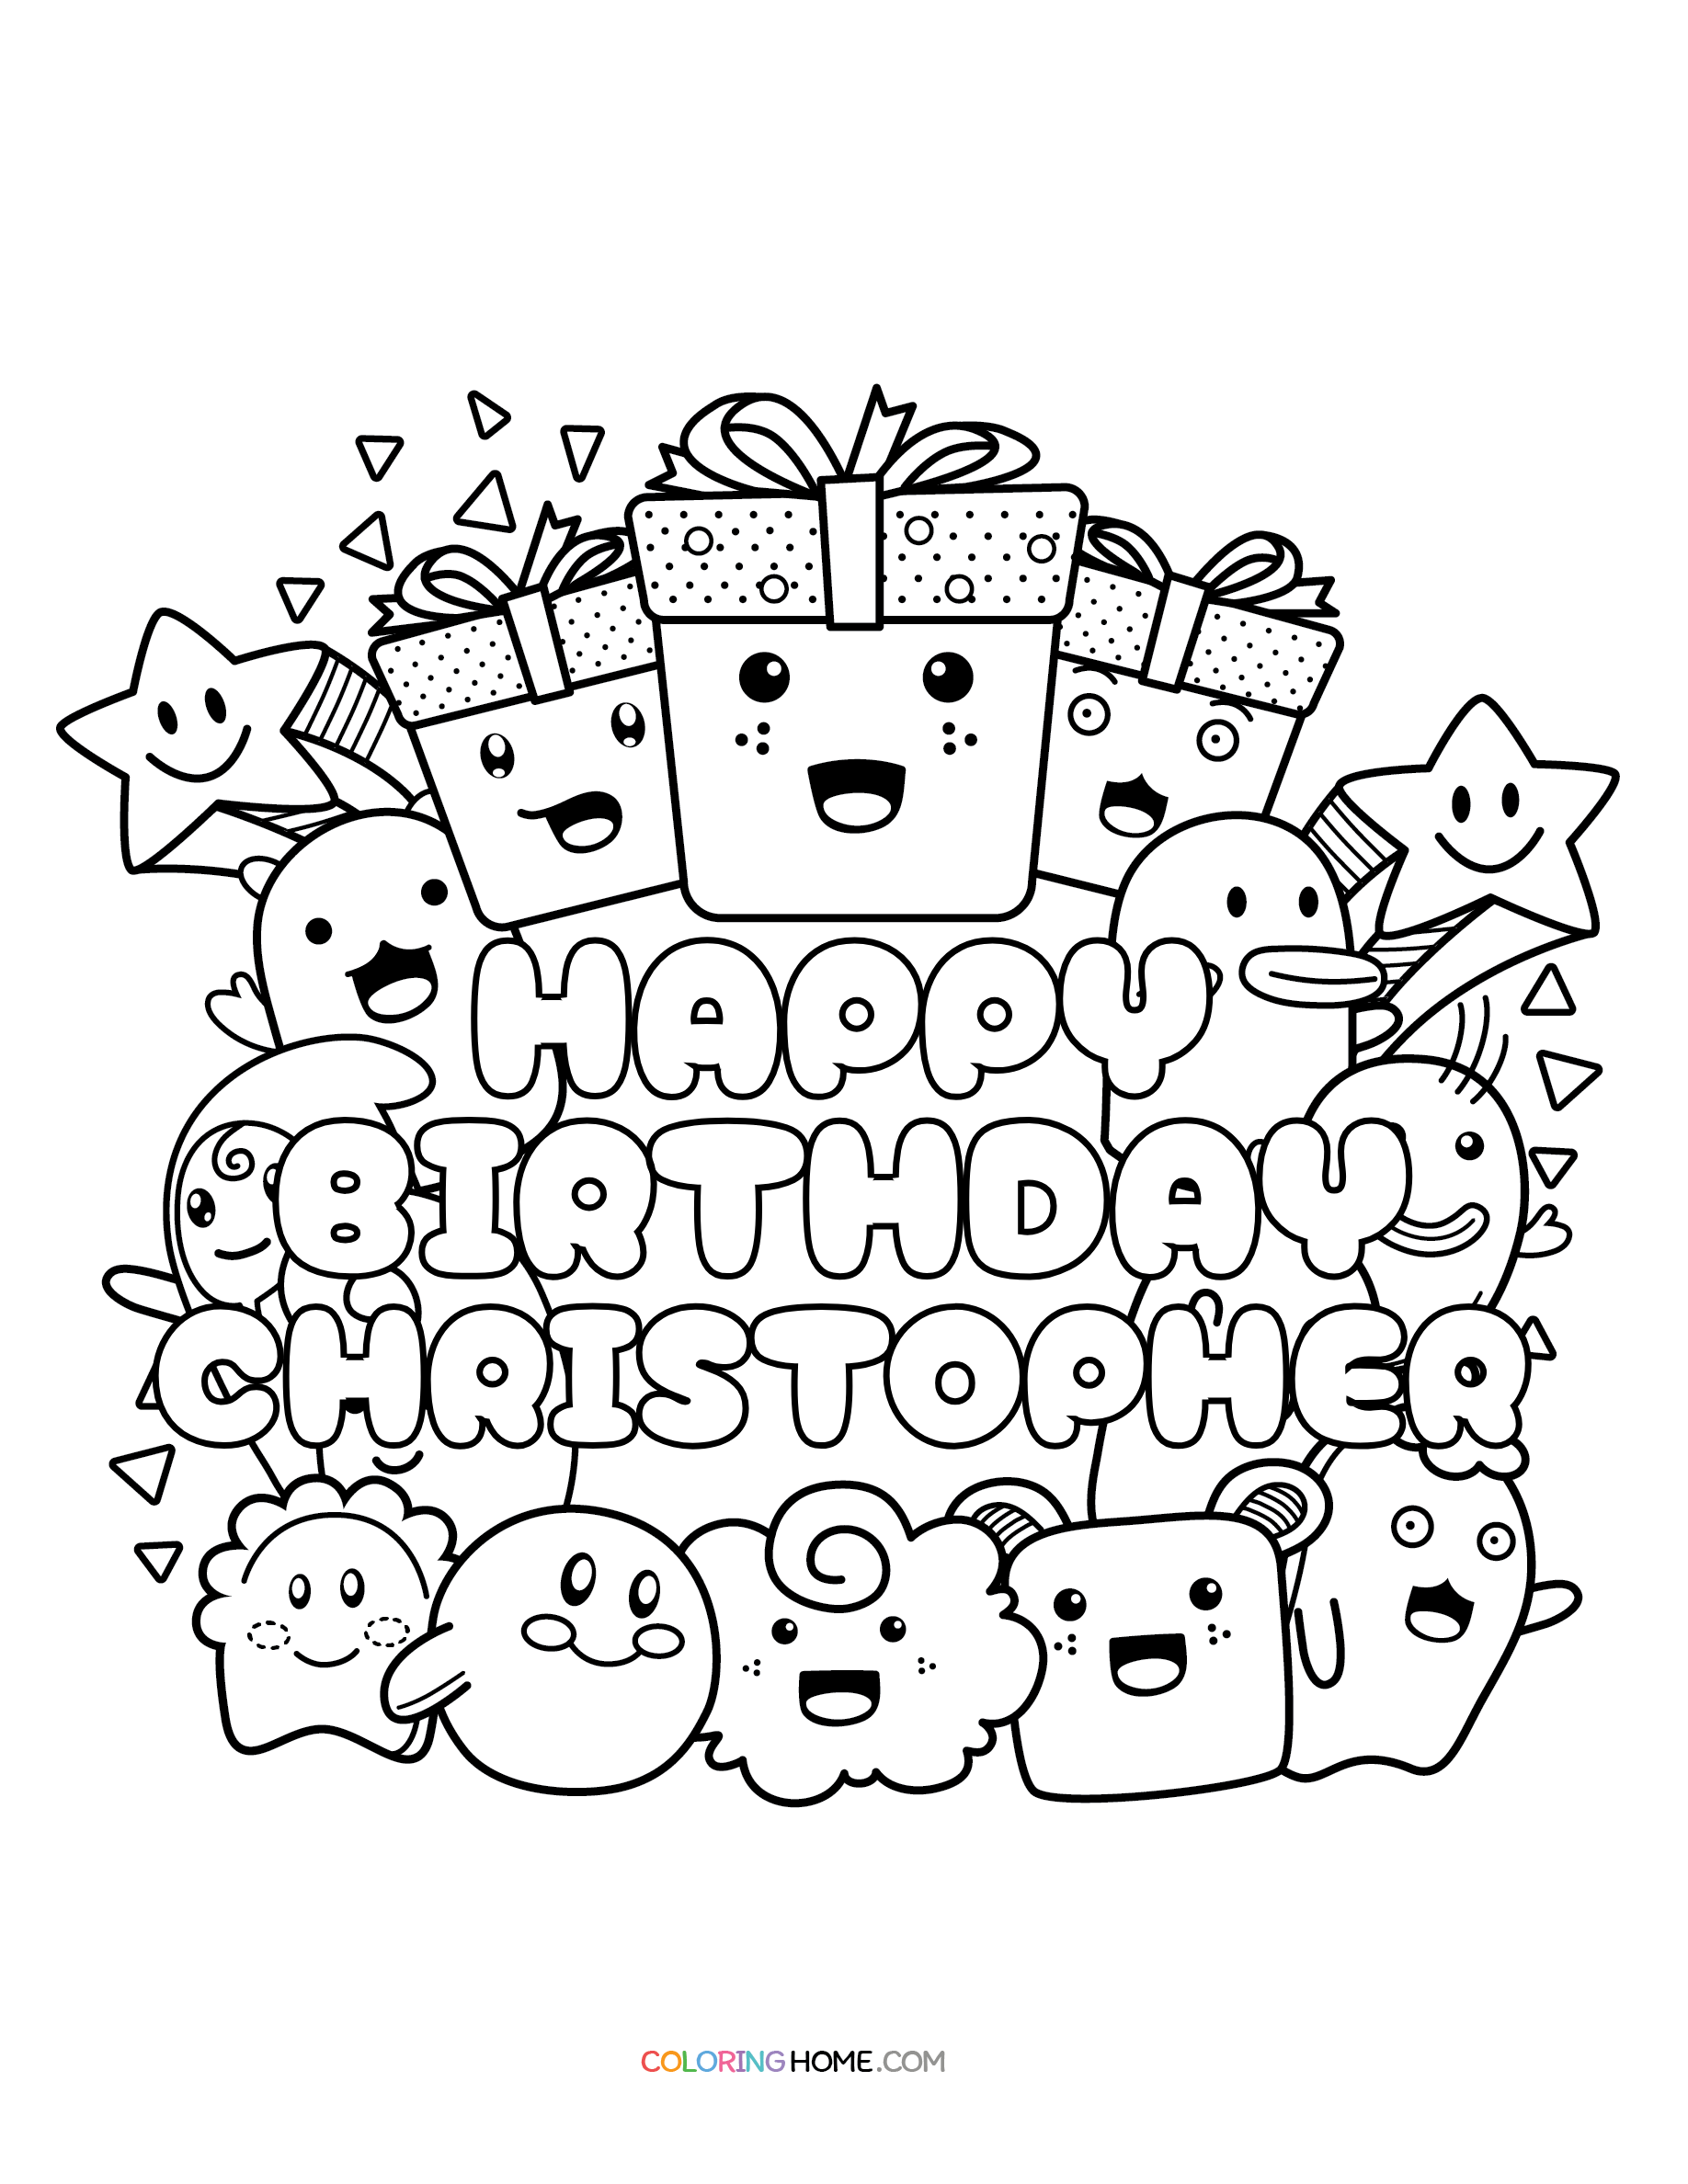 Happy Birthday Christopher coloring page